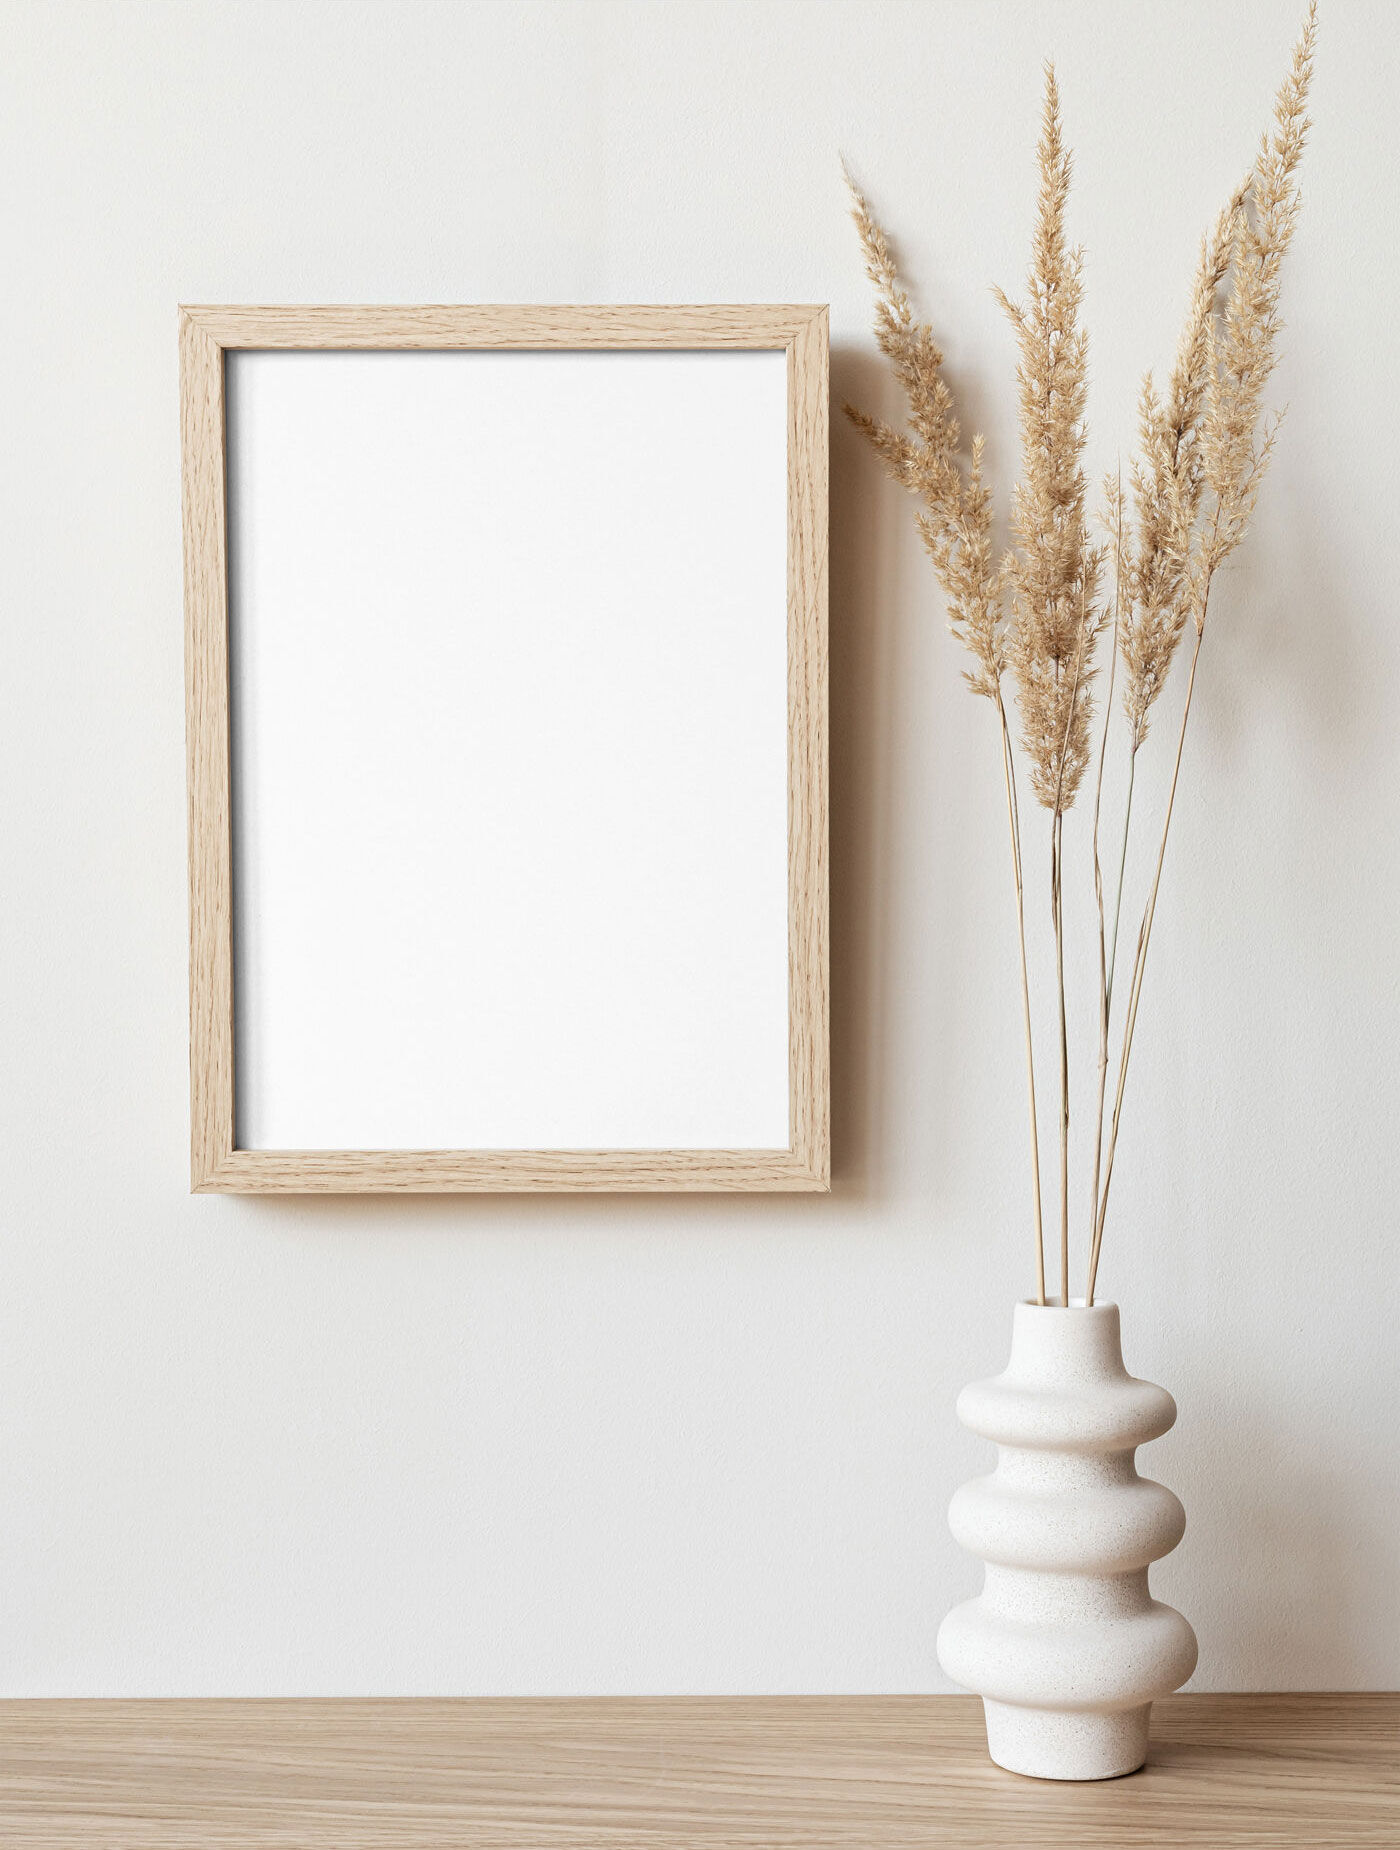 Vertical, Wooden Wall Frame in the Front View Mockup FREE PSD